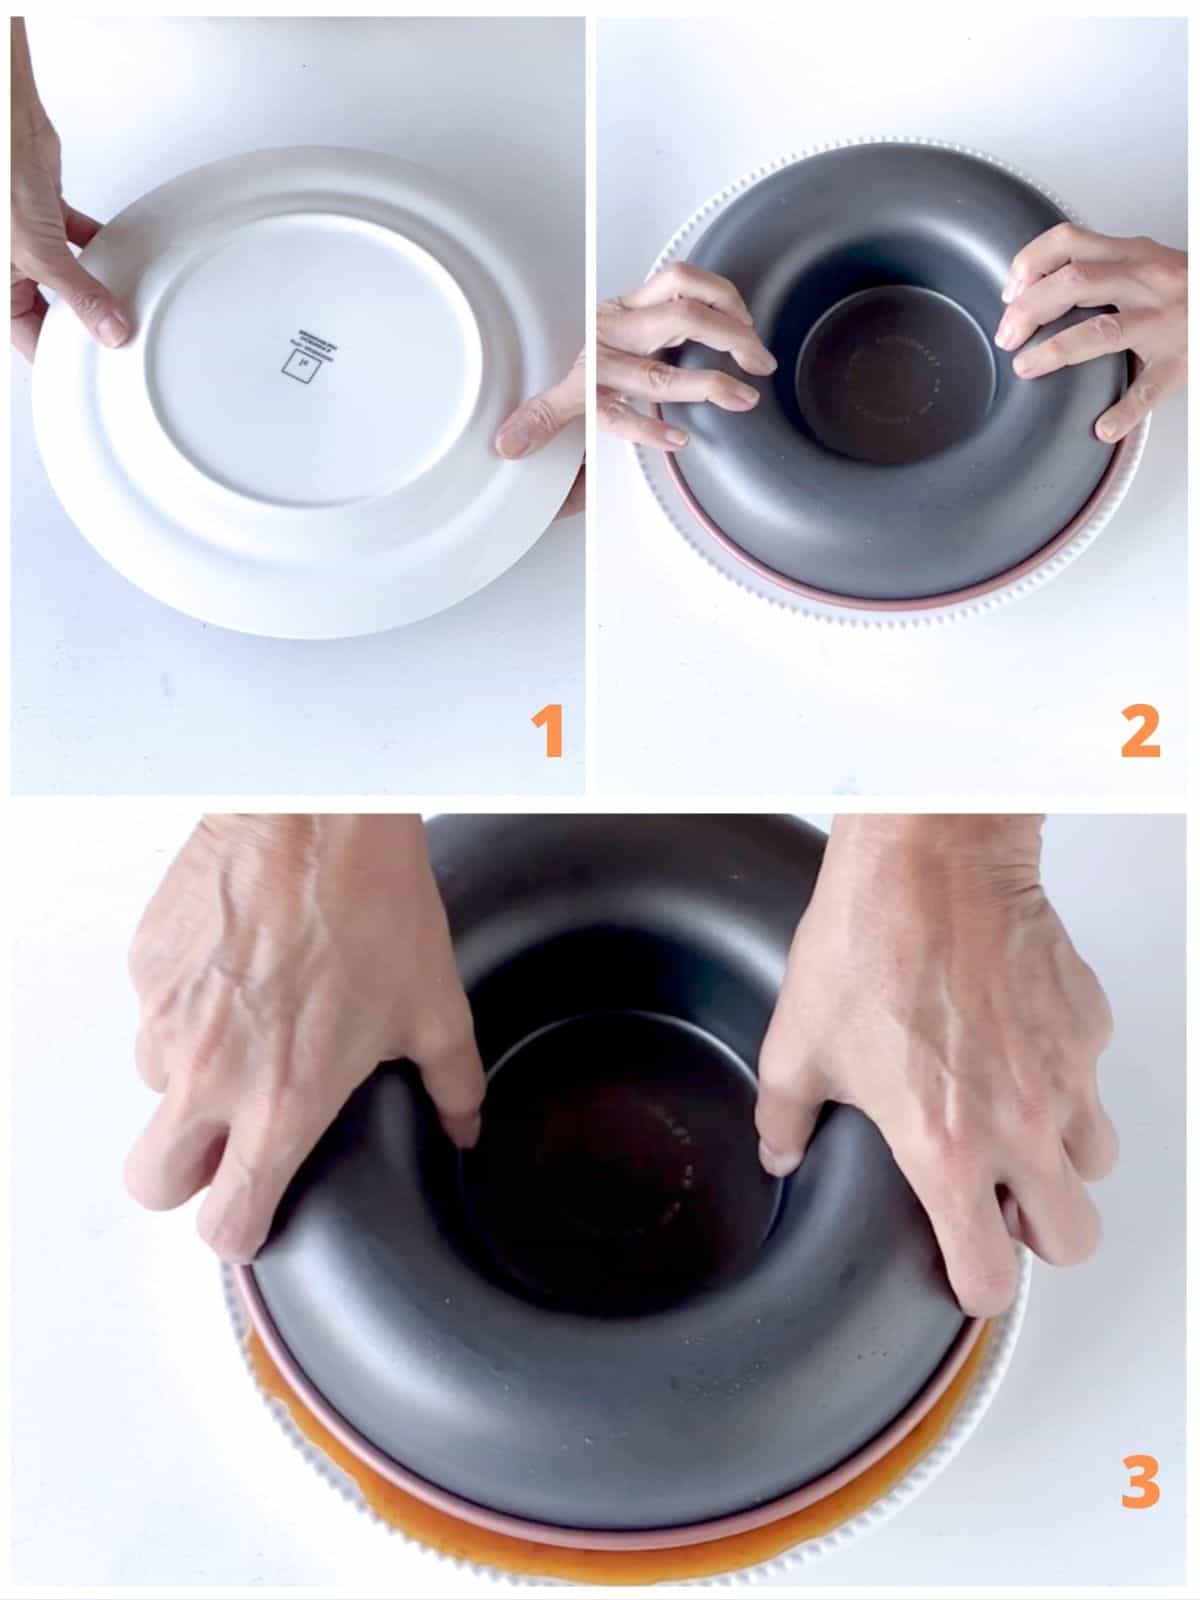 Three image collage showing hands flipping over flan from pan with white plate on white table.